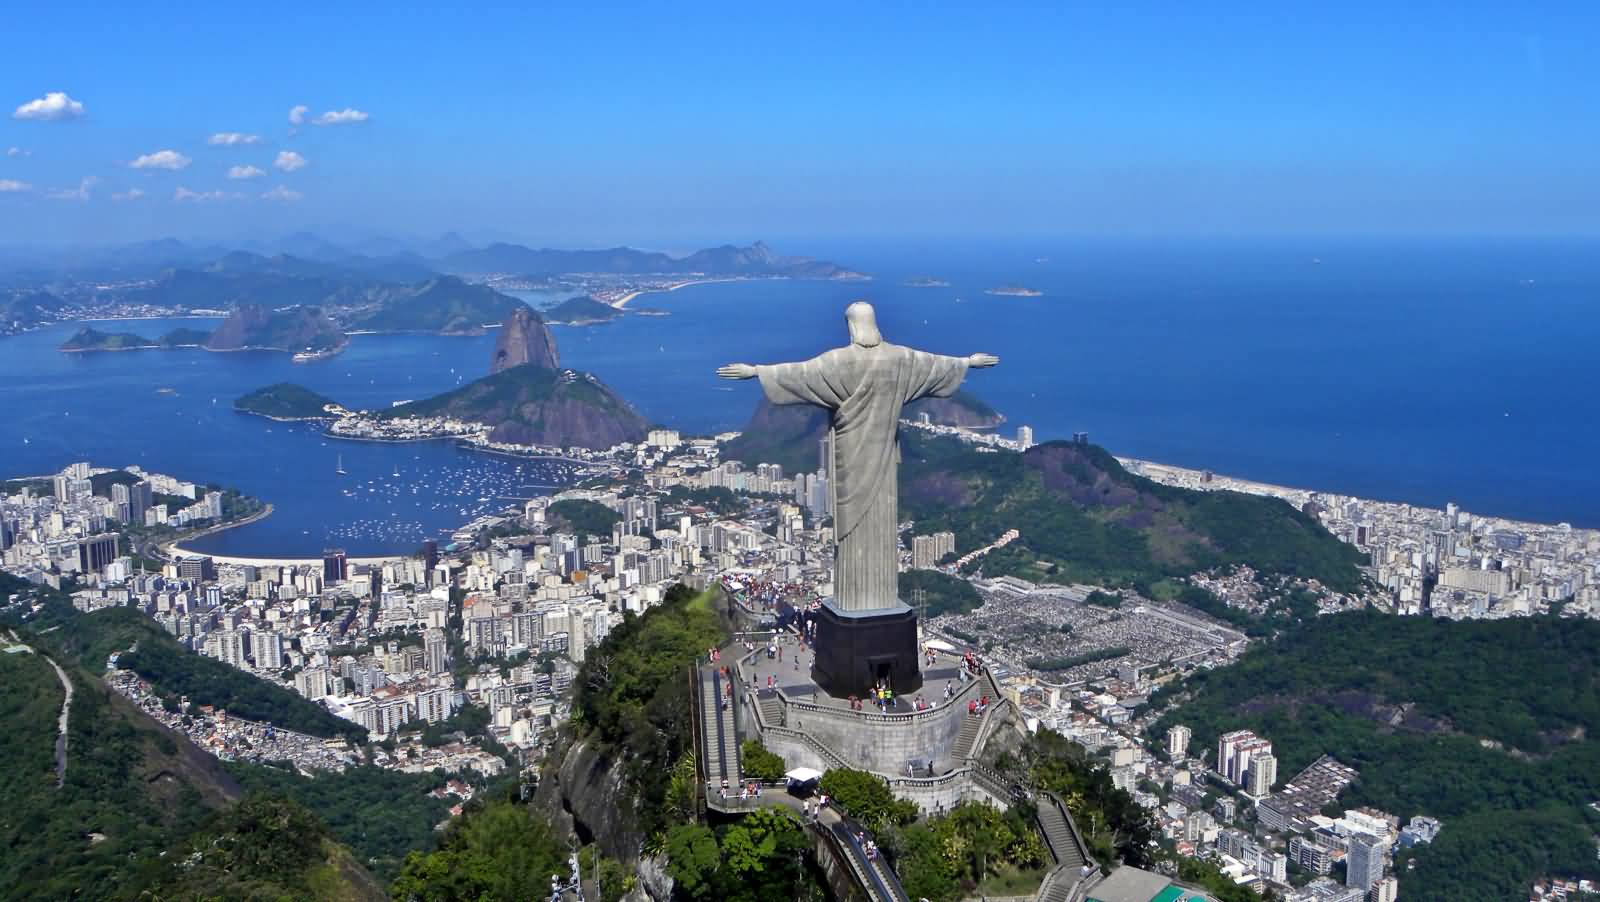 Back View Of Christ the Redeemer Statue At The Top Of Corcovado Mountain In Brazil